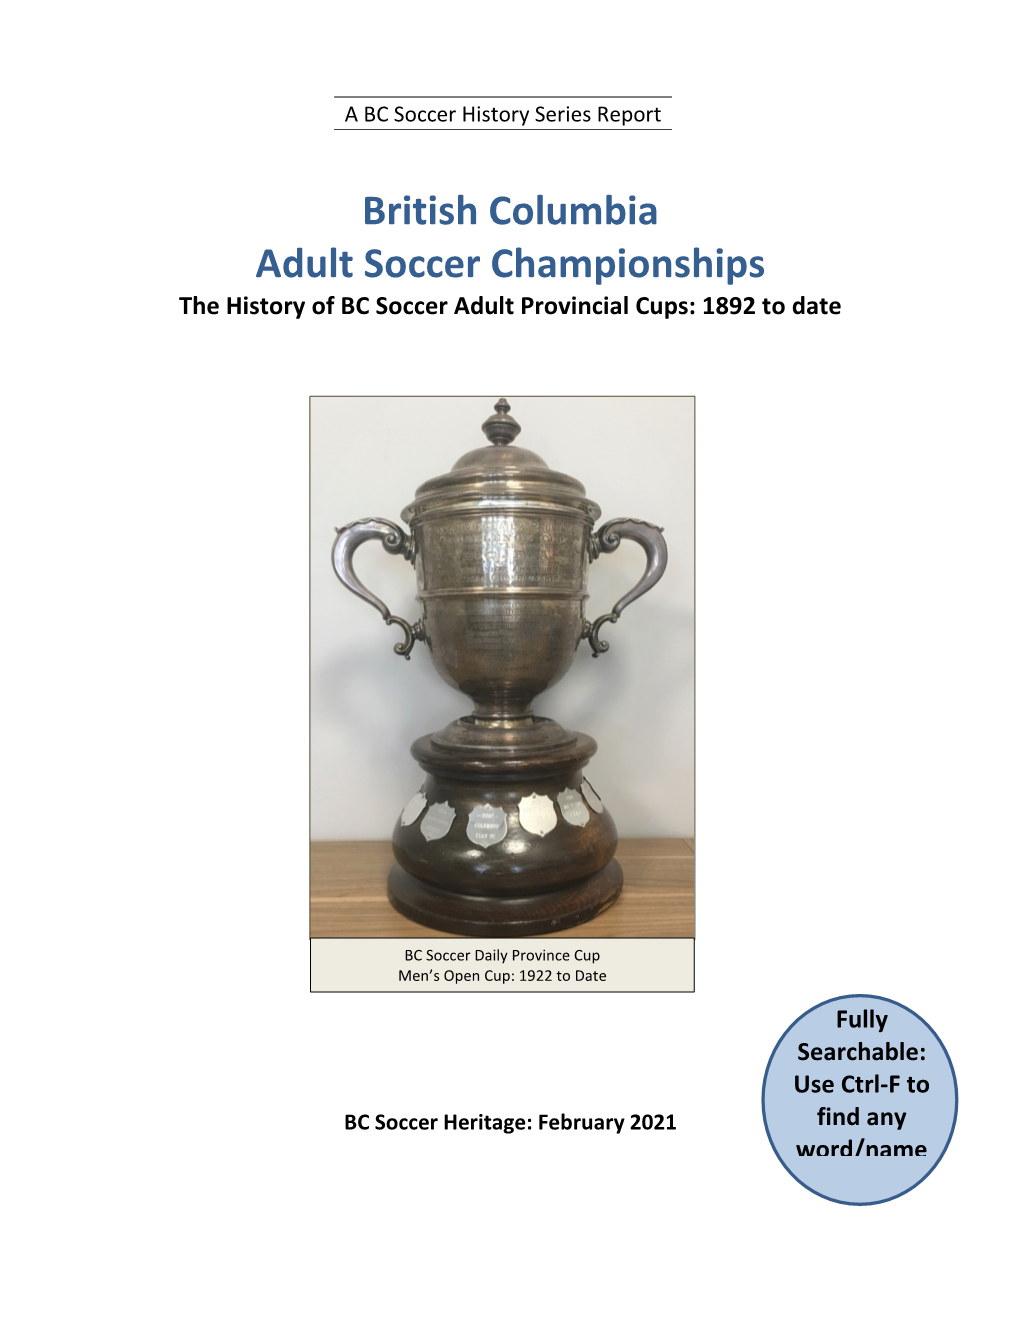 British Columbia Adult Soccer Championships the History of BC Soccer Adult Provincial Cups: 1892 to Date